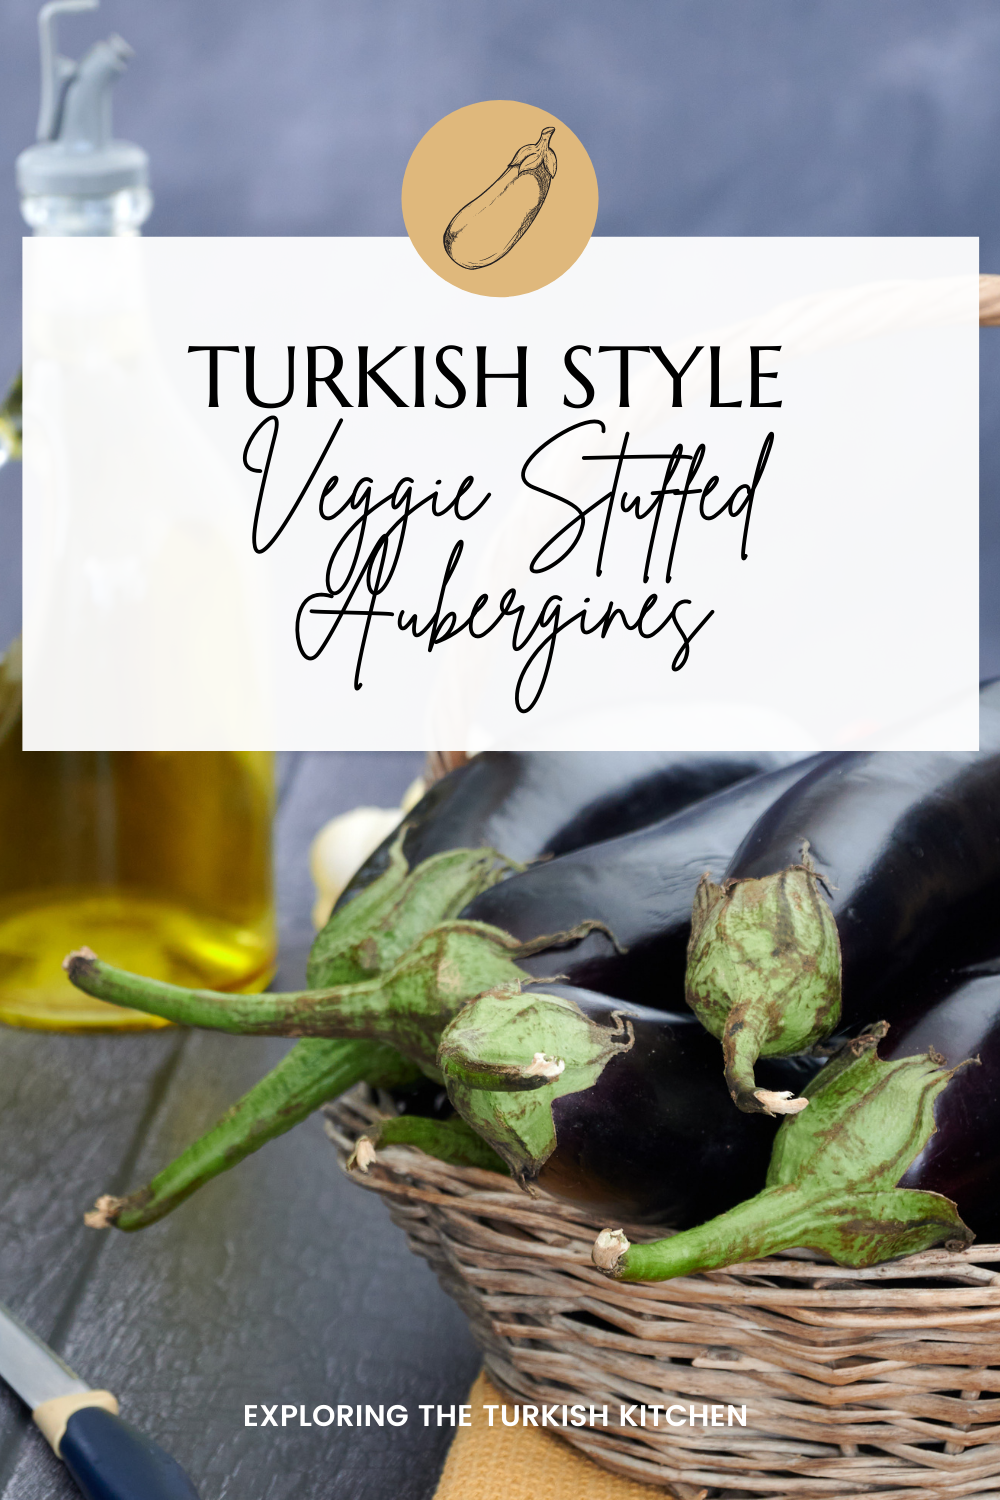 Pinable image for Imam Bayıldı. Picture shows a basket of Turkish aubergines and bottle of Turkish olive oil on a wooden table. Text overlay reads: Turkish aubergine recipes.